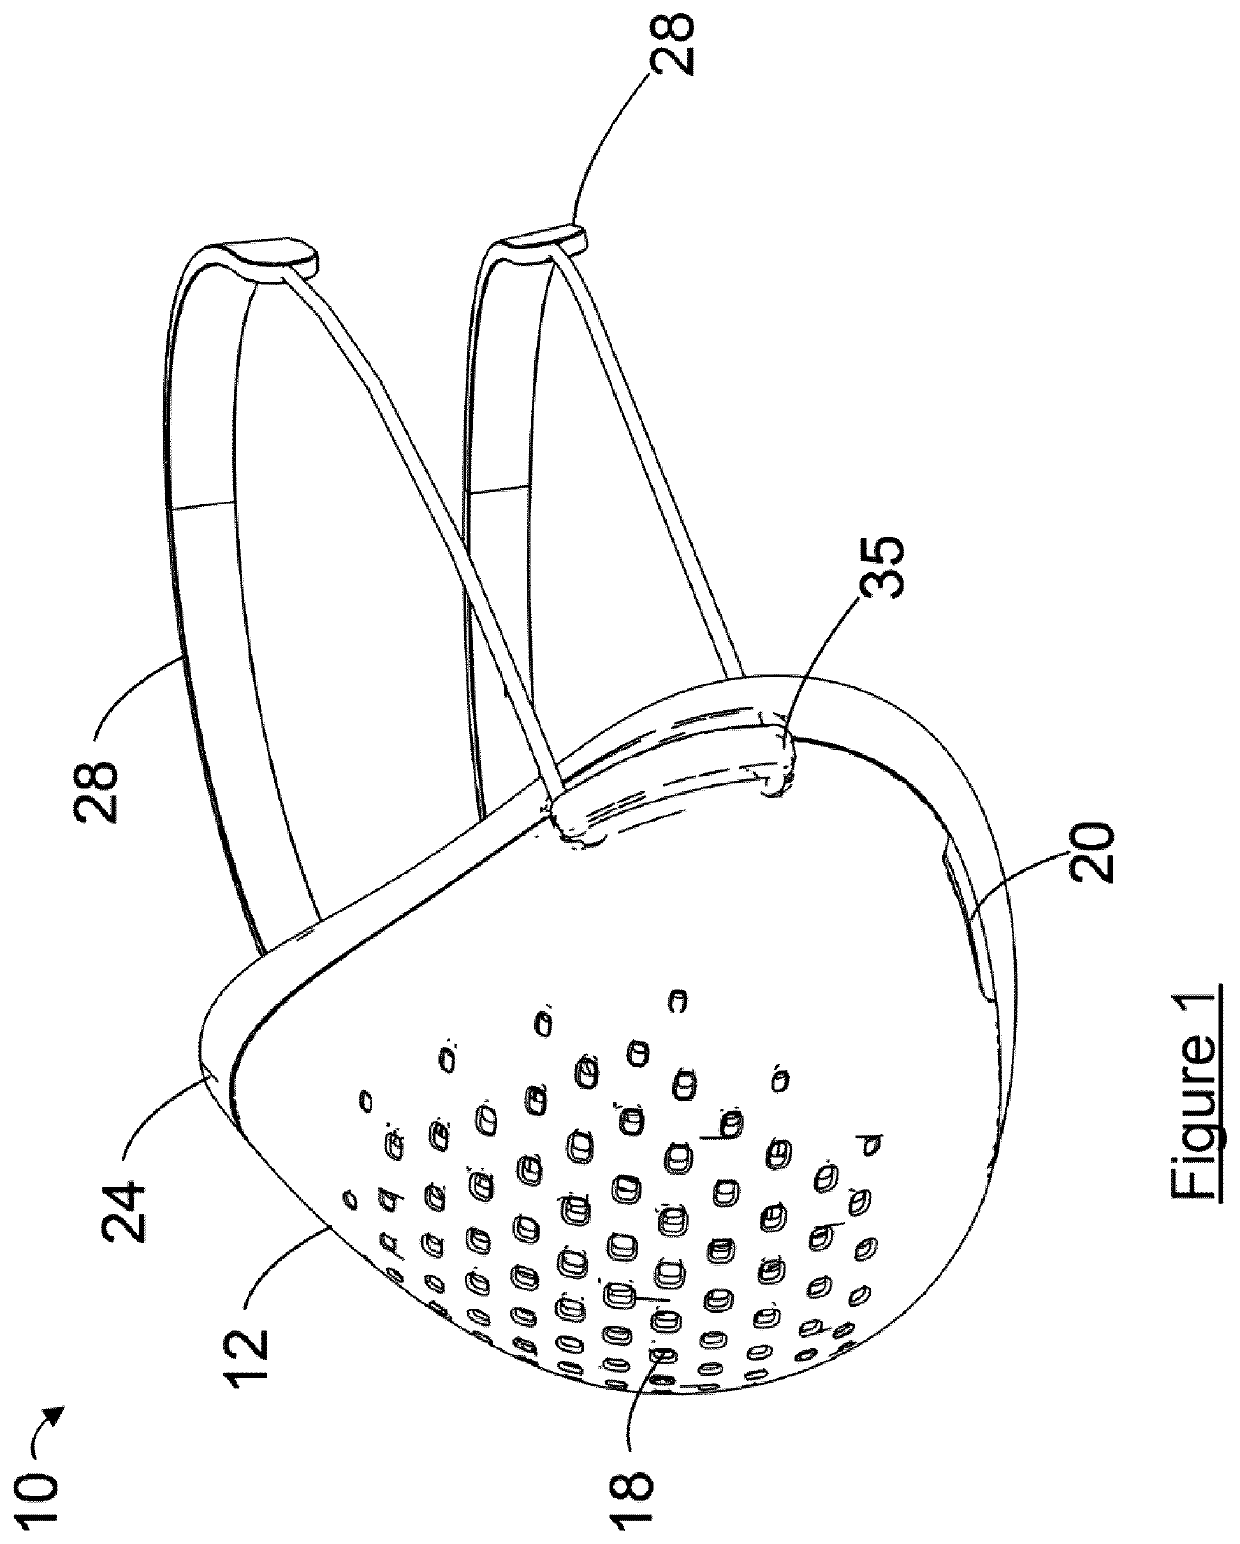 Face mask for filtering air and air monitoring system